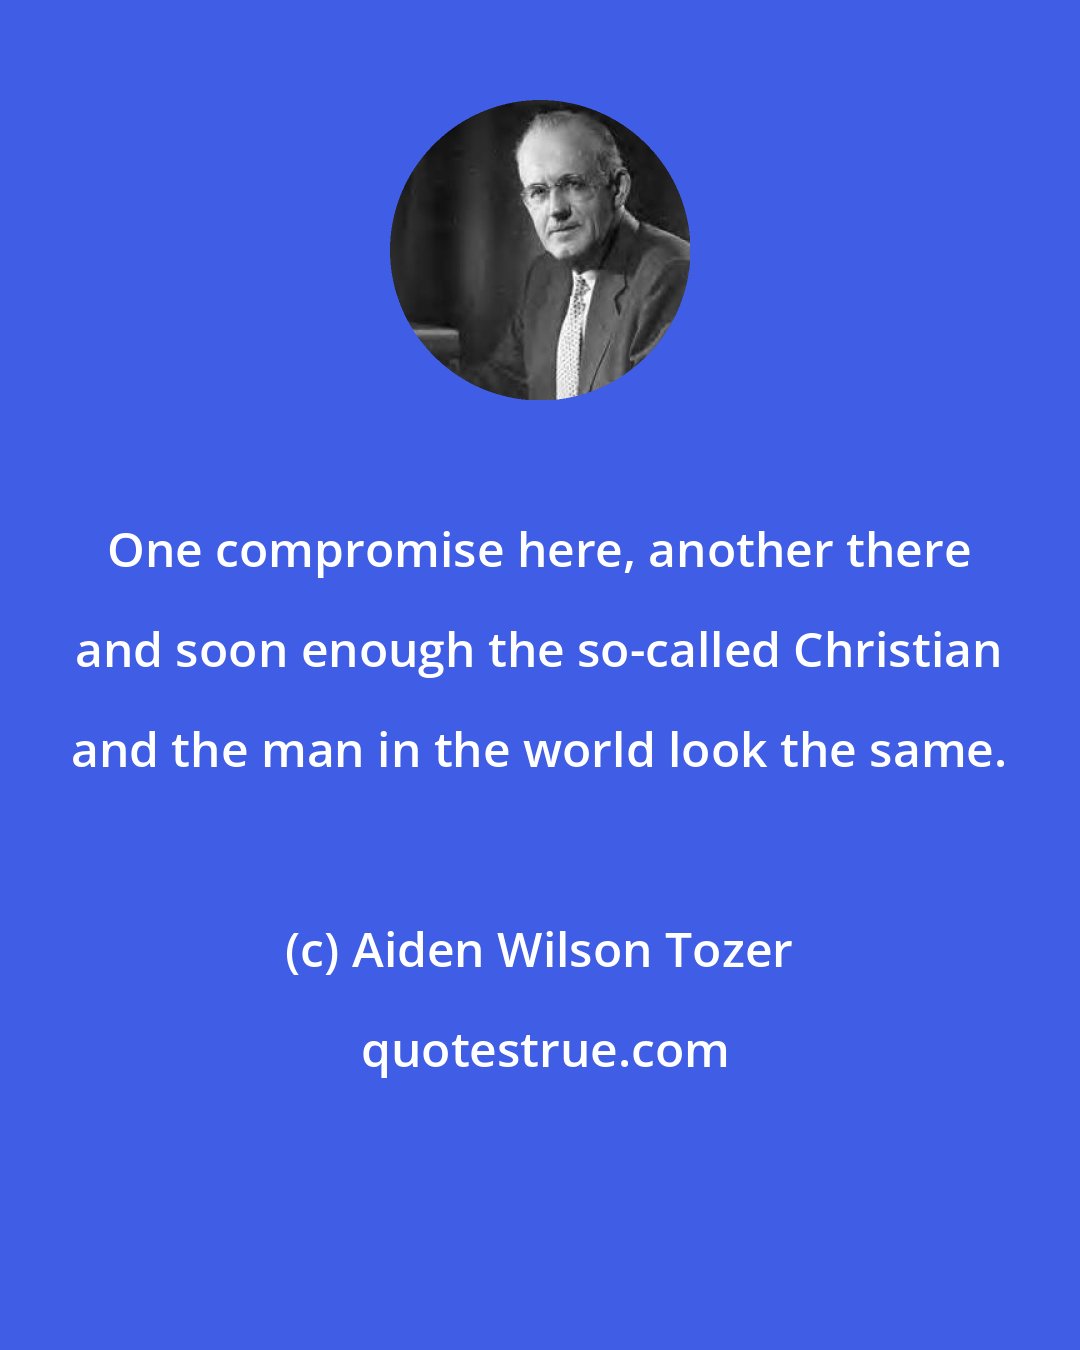 Aiden Wilson Tozer: One compromise here, another there and soon enough the so-called Christian and the man in the world look the same.